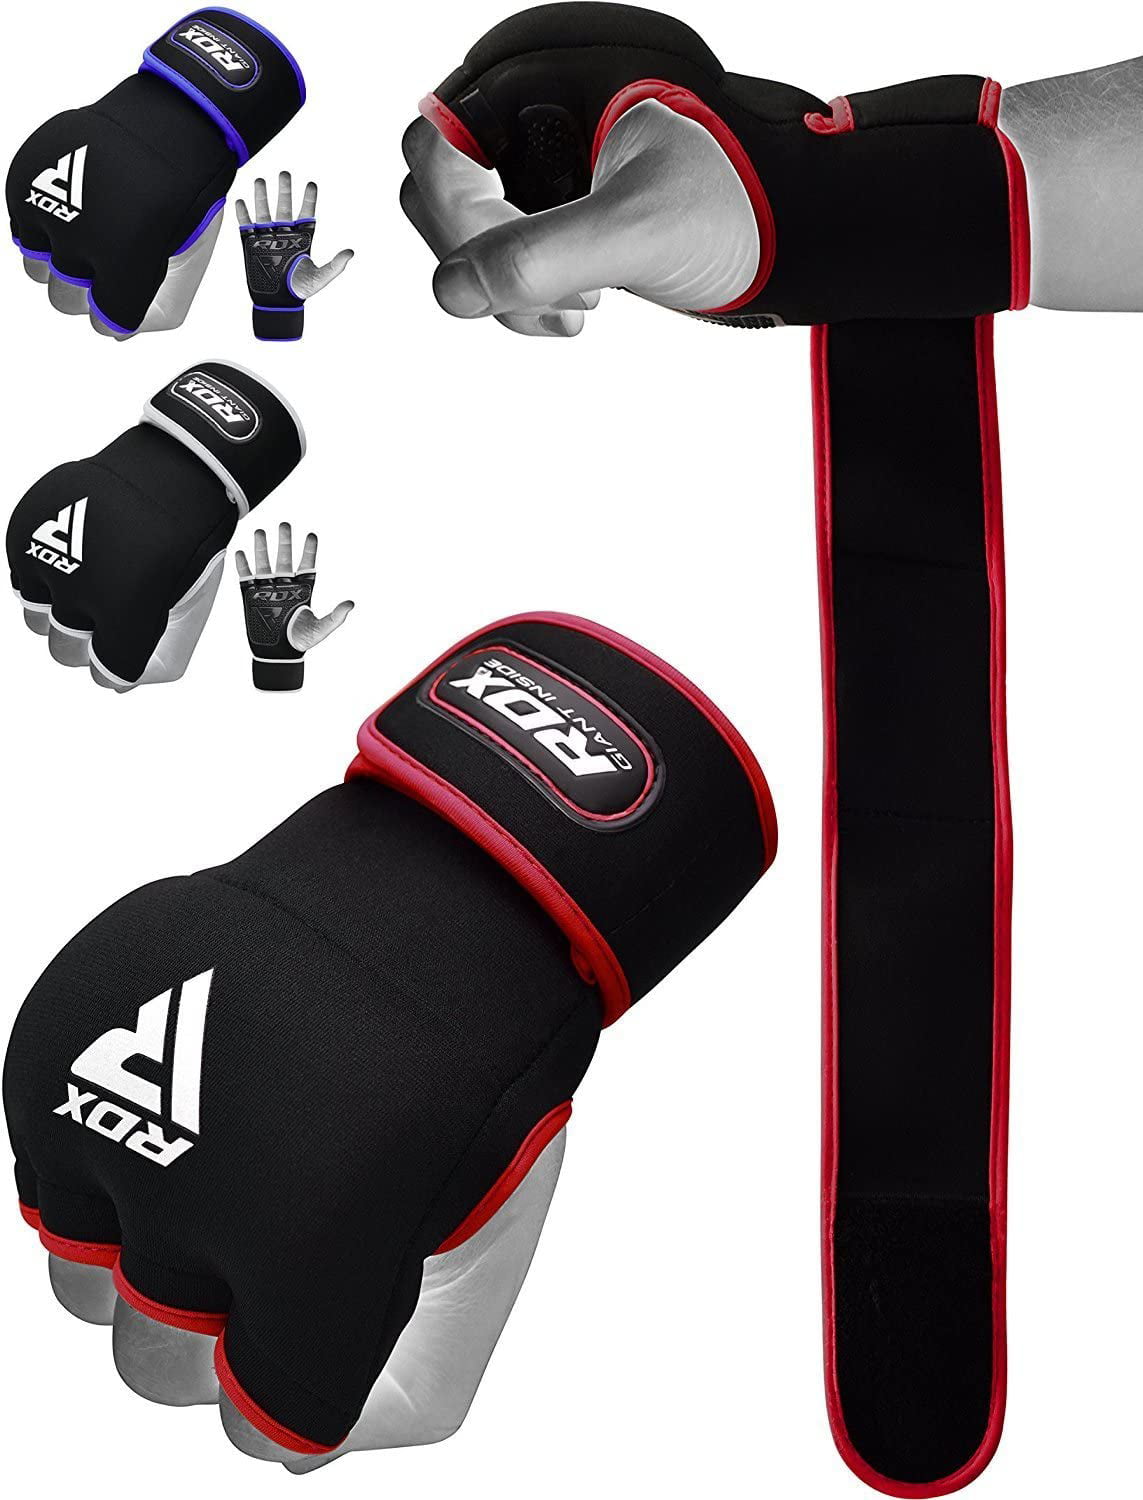 Boxing Inner GEL Gloves for Punching Neoprene Padded Fist Protector Bandages under Mitts 1 meter Long Wrist Support Martial Arts Training Great for MMA,Kickboxing 